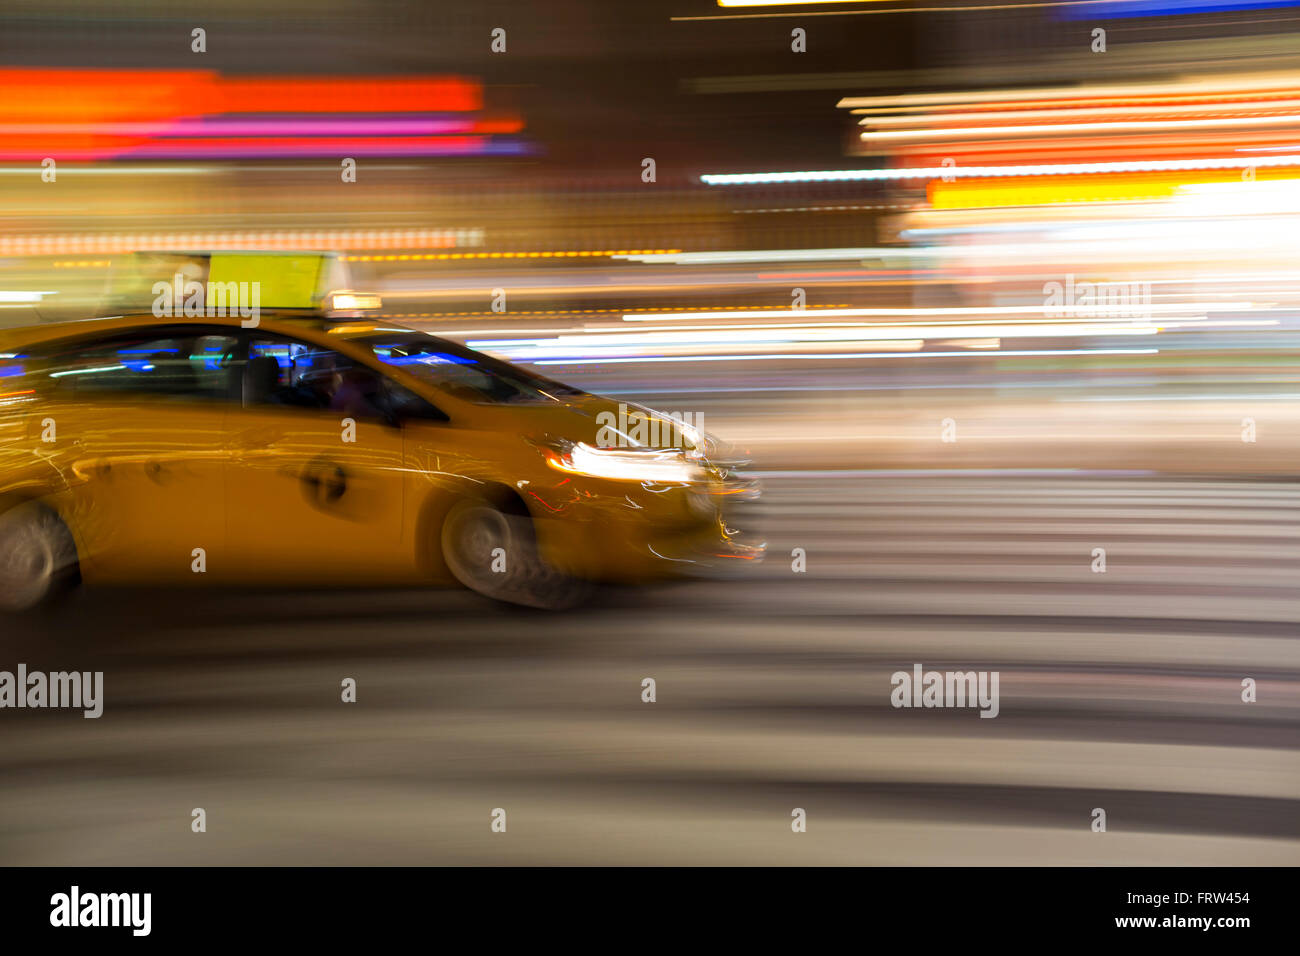 Blurry abstract photo of yellow taxi cabs in motion in Manhattan, New York City Stock Photo